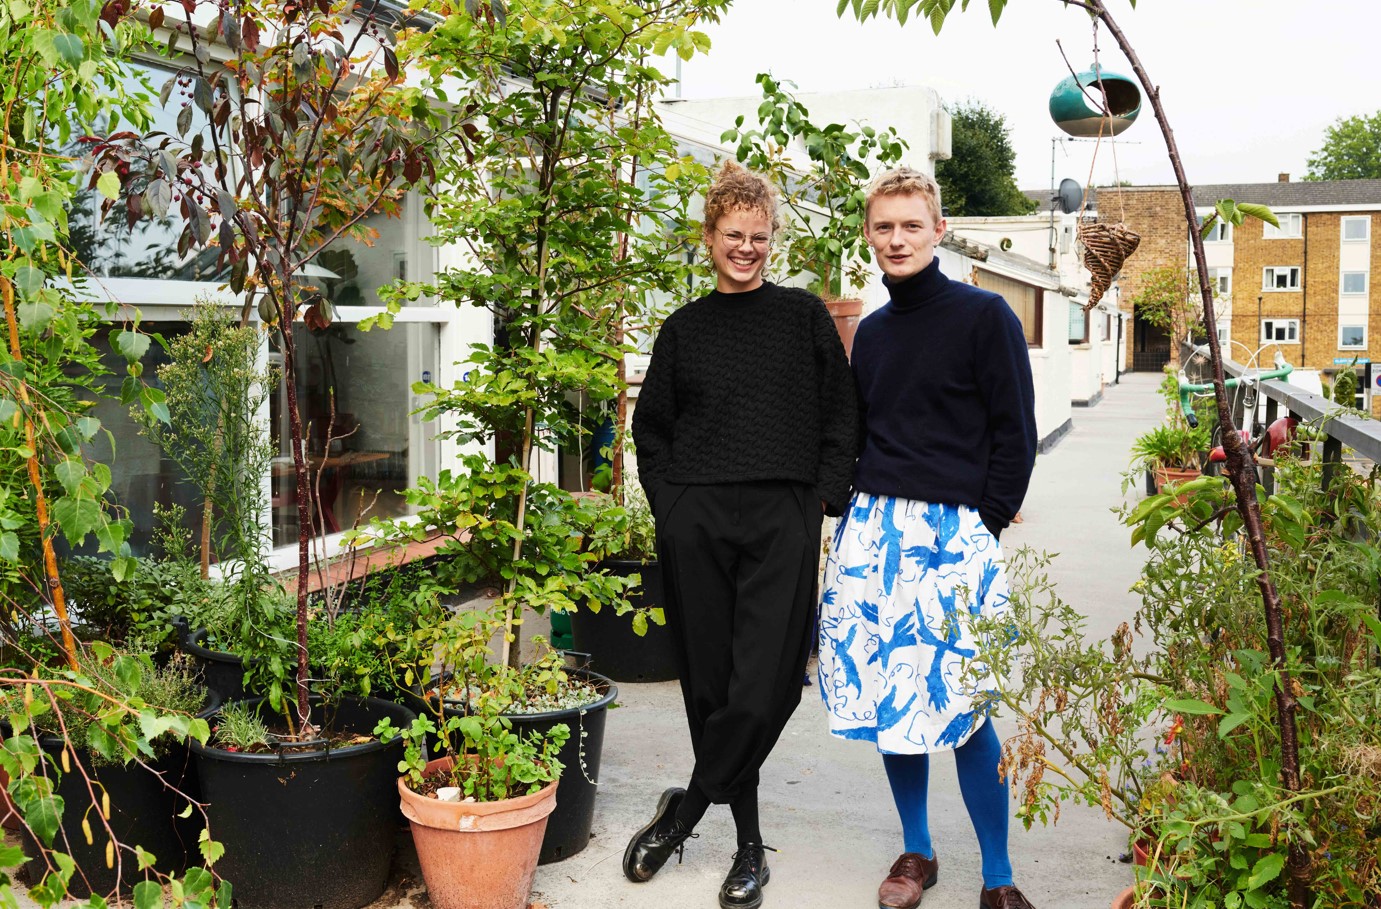 Two people stood outside on a terrace, surrounded by plants